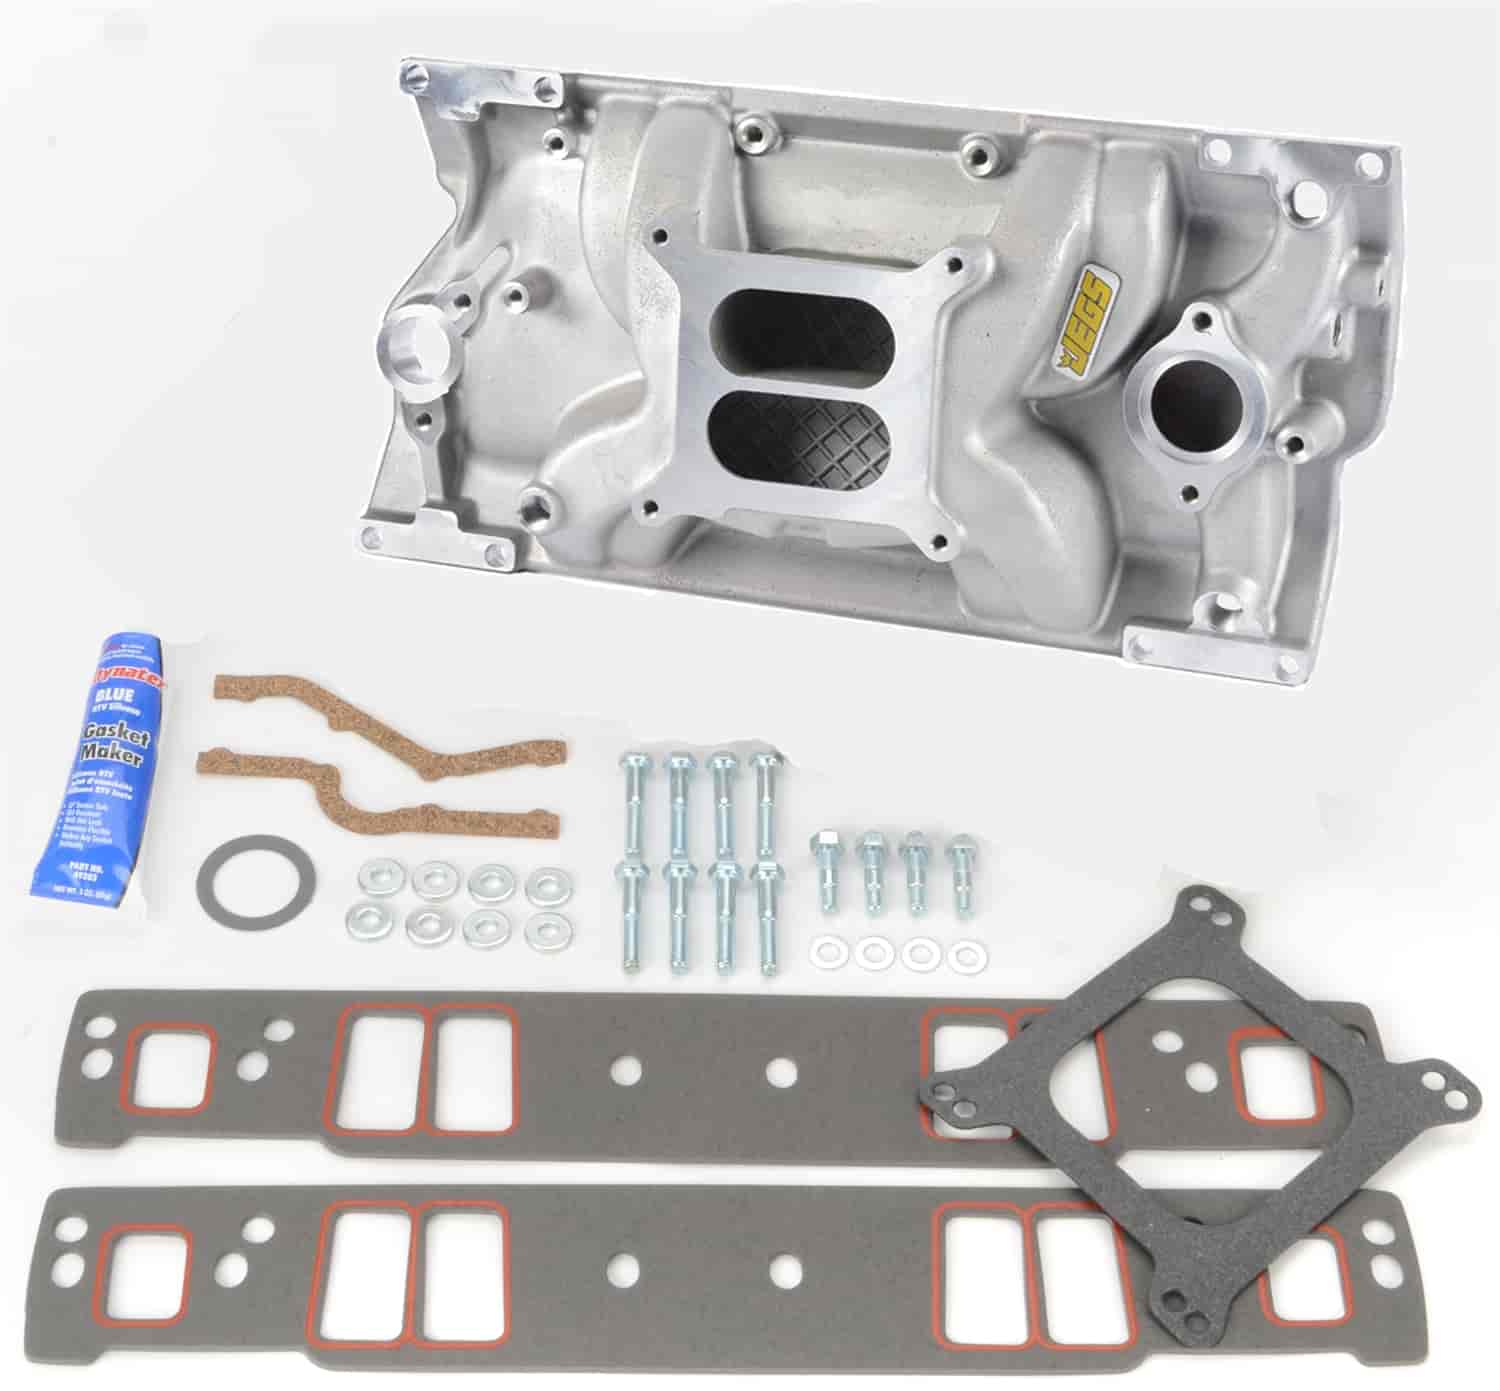 Intake Manifold with Installation Kit for 1996-2002 Small Block Chevy 350 Vortec with L31 Cast Iron Heads